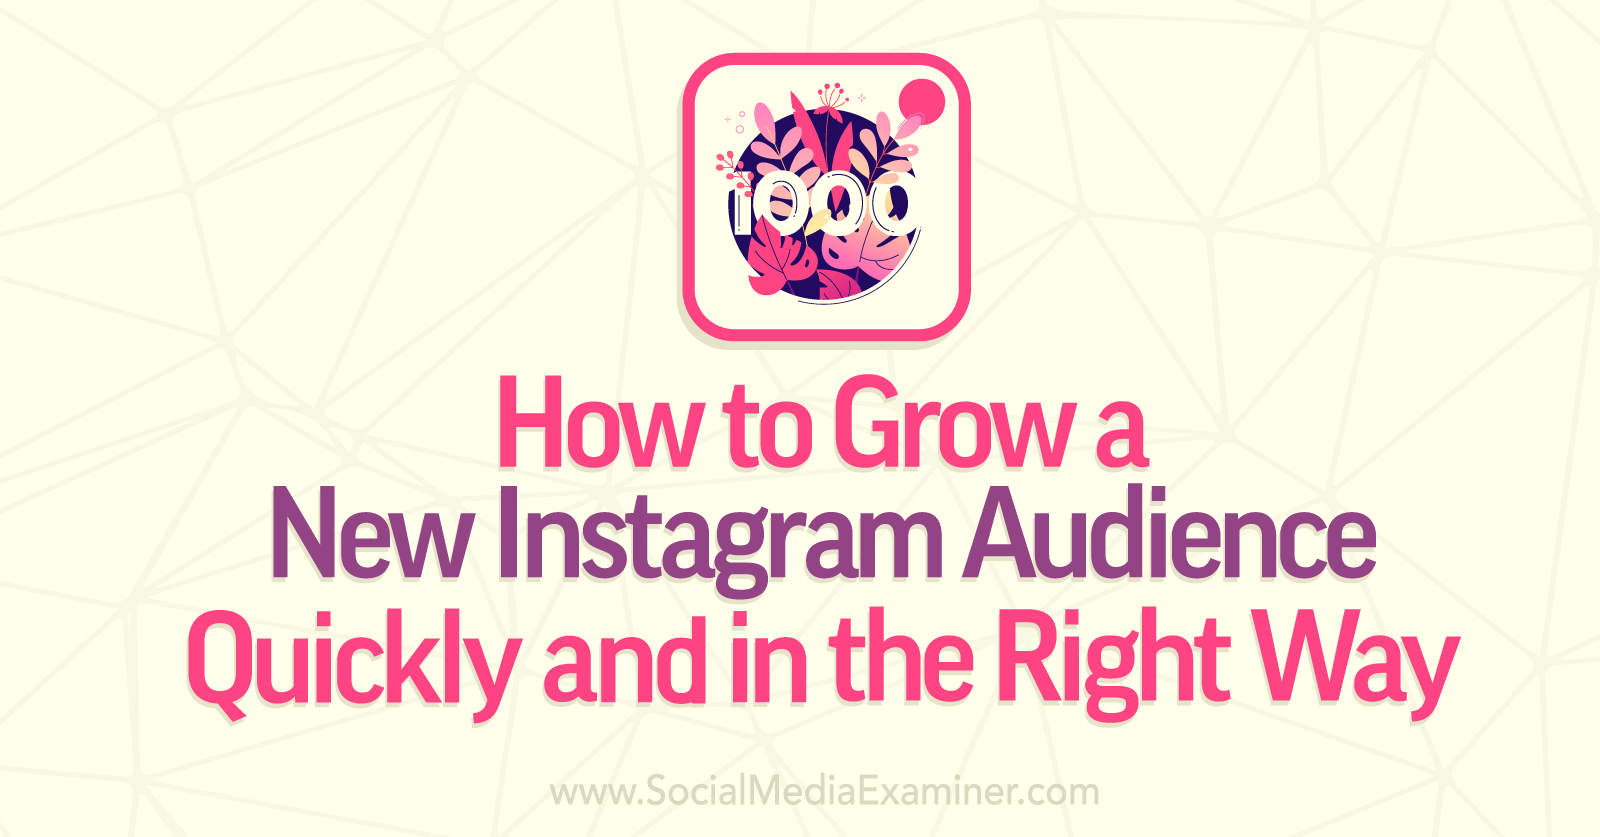 How to do a Giveaway on Instagram to Generate Leads & Expand Reach